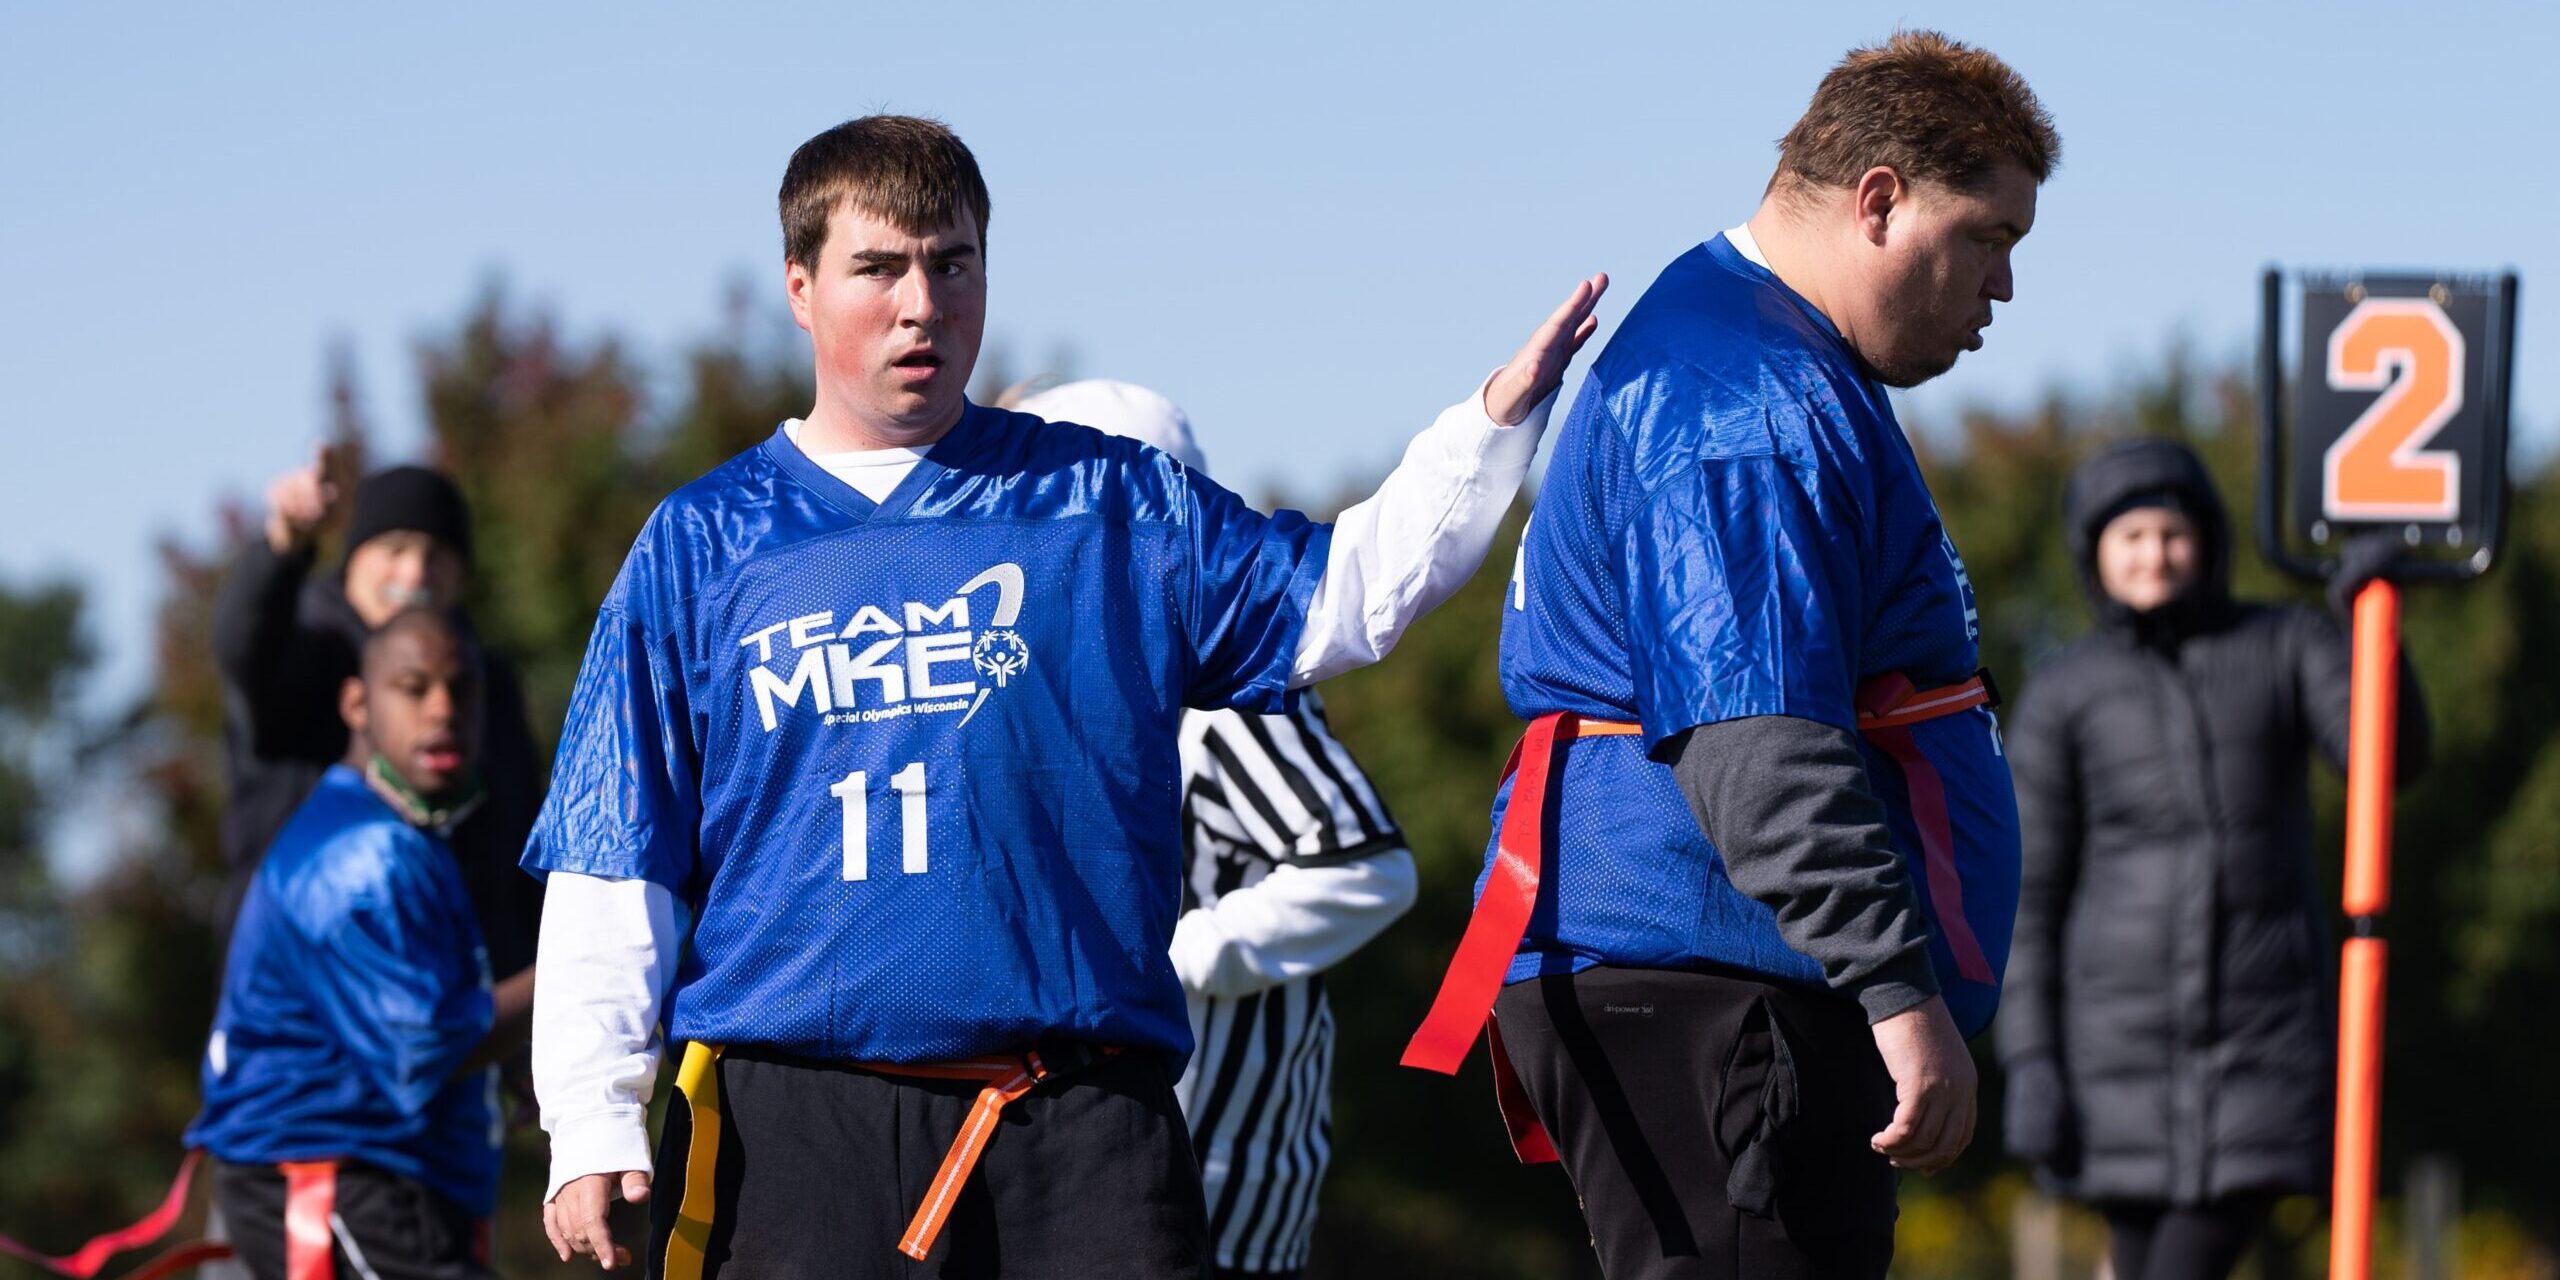 Two men in blue jerseys playing flag football.